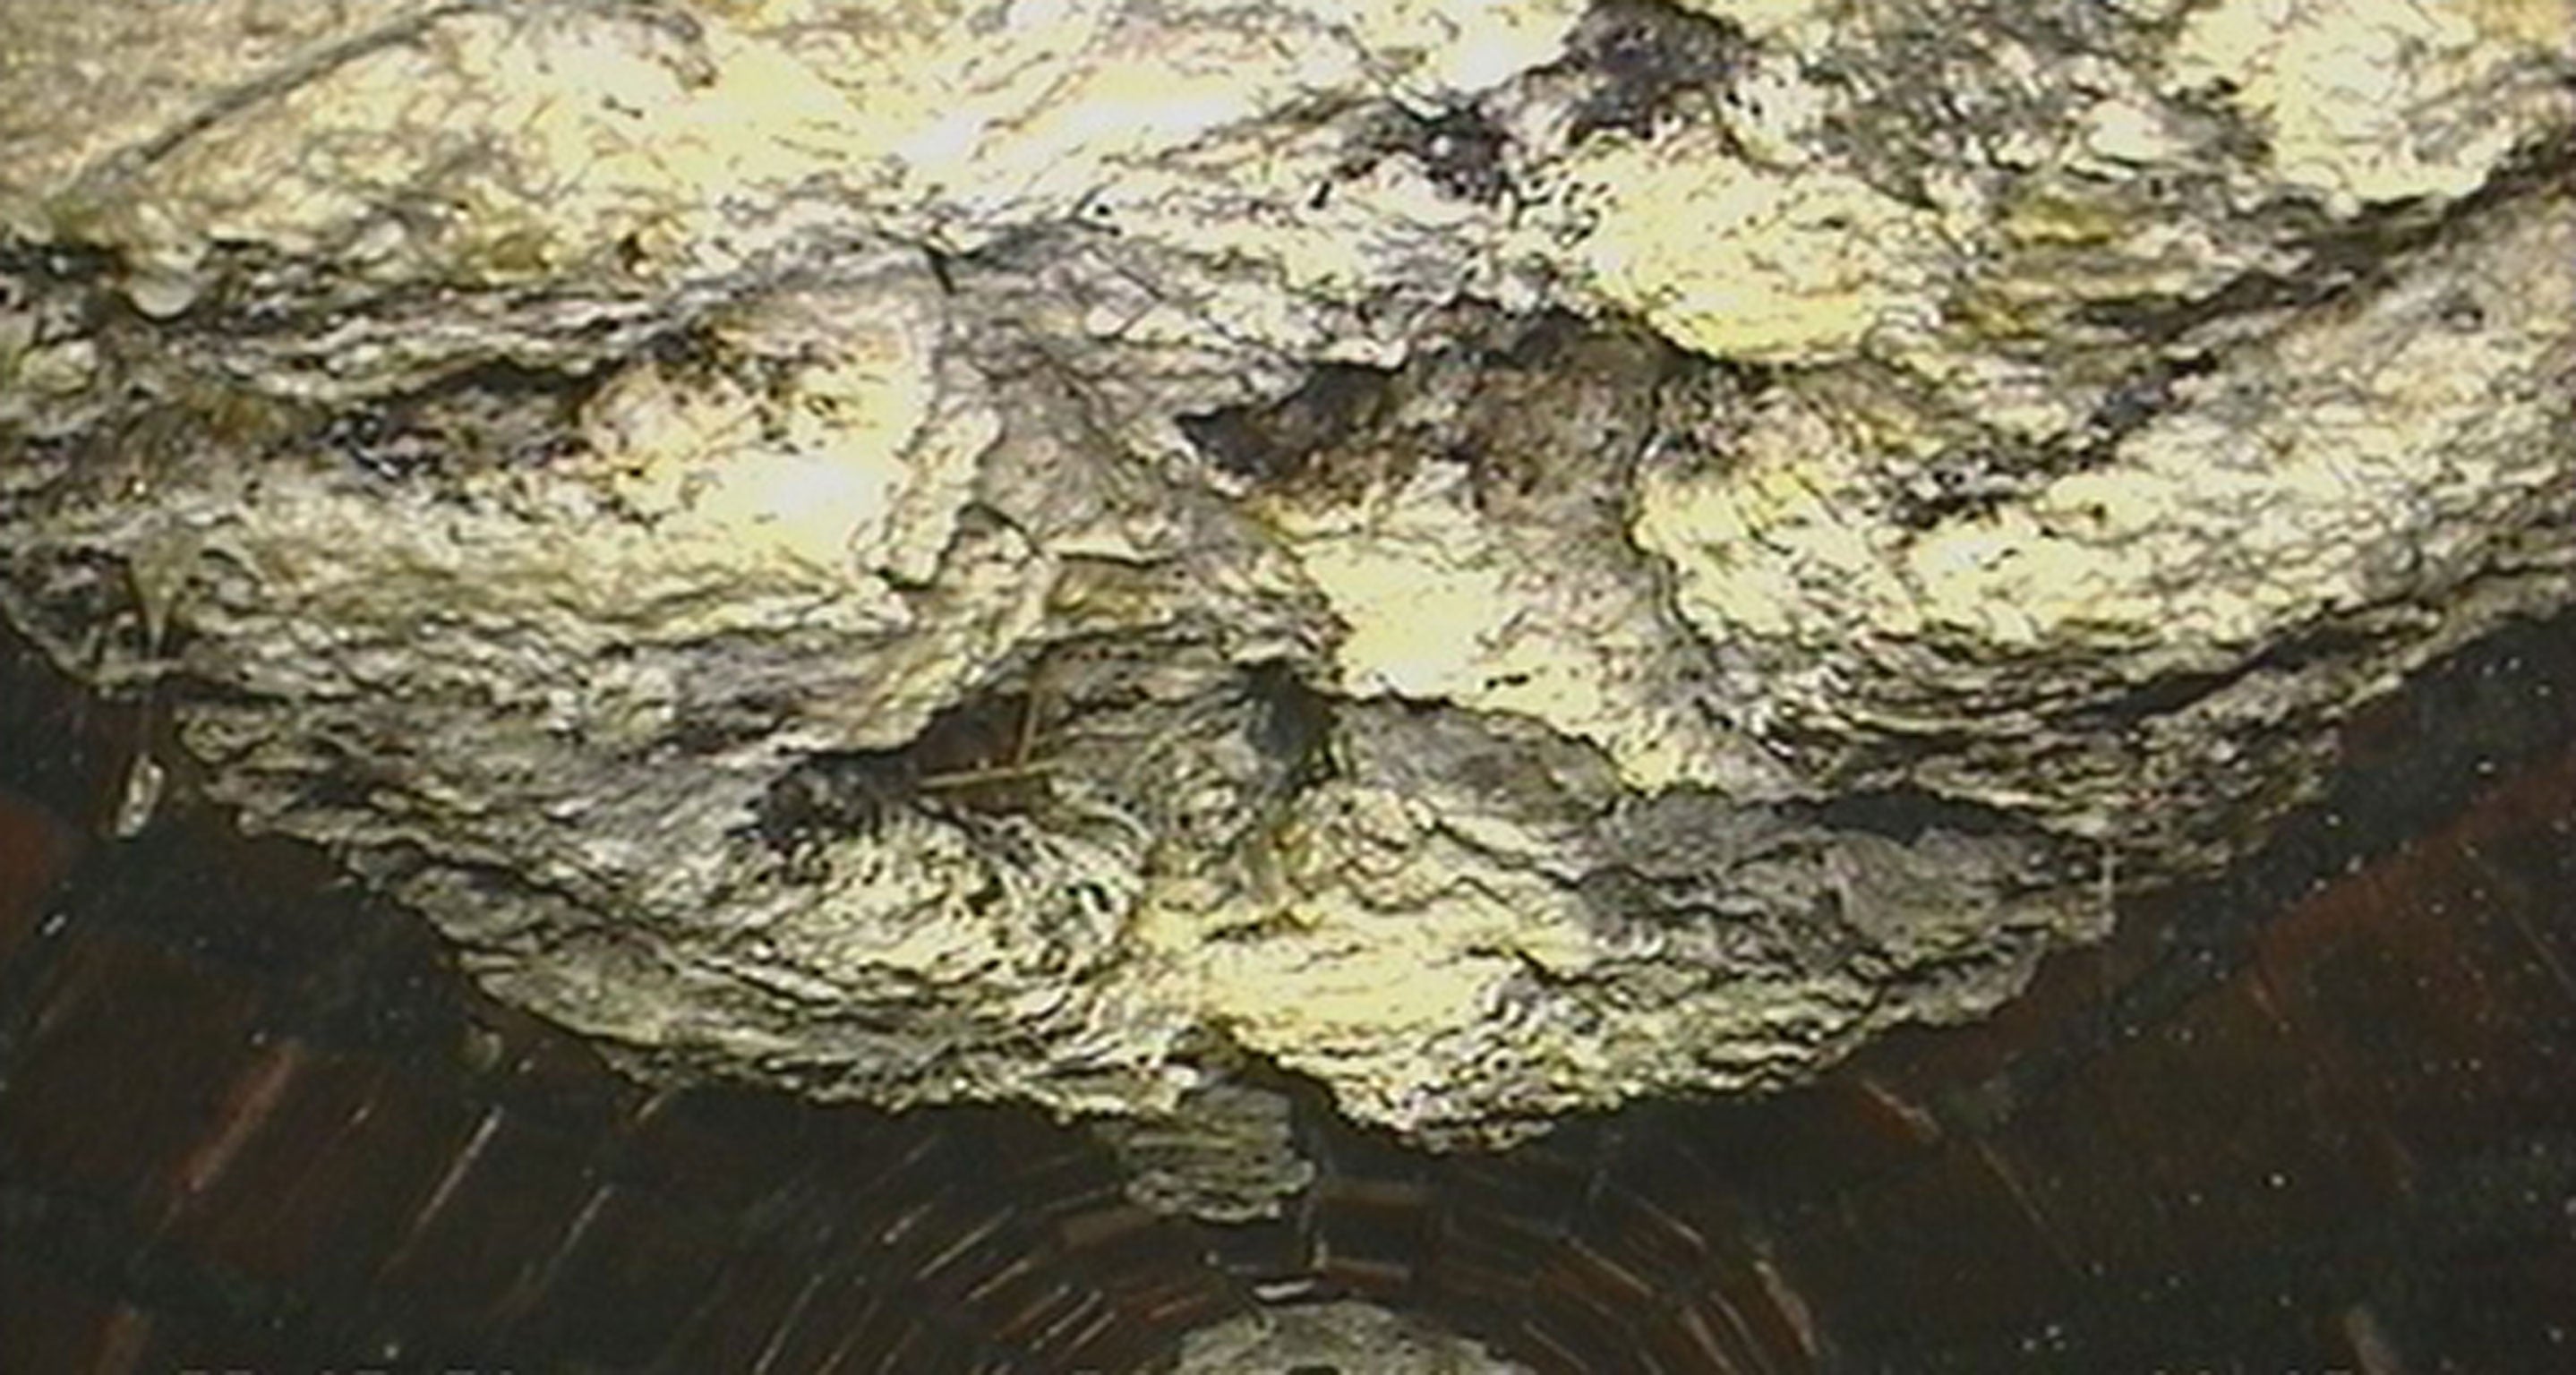 The congealed mushy deposit, dubbed a 'fatberg' by the authority, is thought to be the largest ever found in Britain.